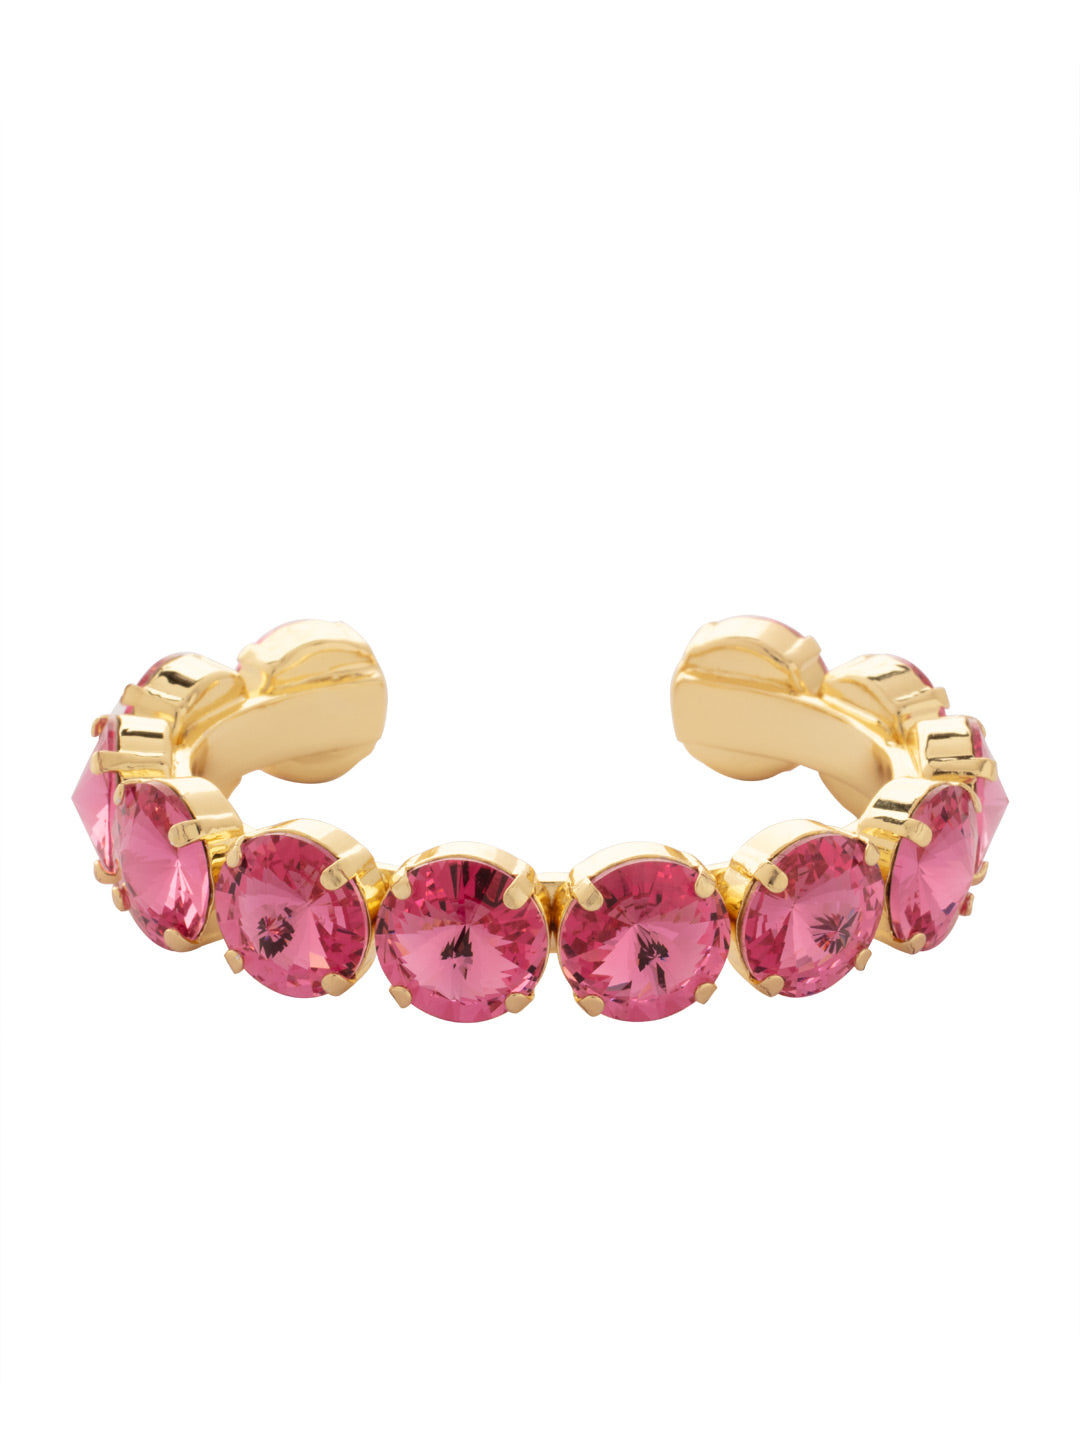 Nadine Cuff Bracelet - 4BEZ17BGRO - <p>The Nadine Cuff Bracelet makes a bold statement; chunky round crystals fully encompass an adjustable metal band. From Sorrelli's Rose collection in our Bright Gold-tone finish.</p>